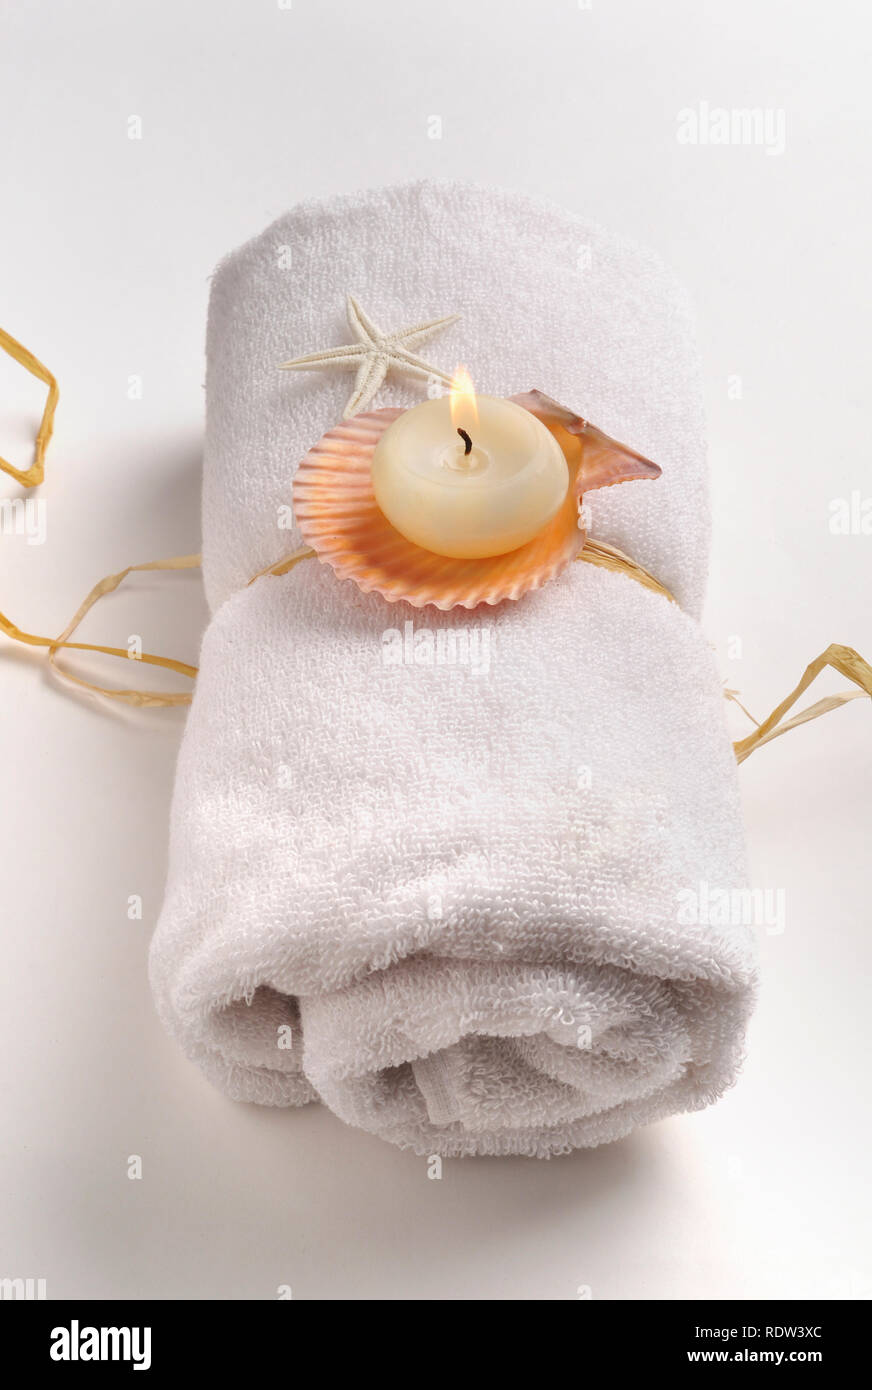 Lit-up scented candle with natural shells placed on rolled white towel - spa still life Stock Photo